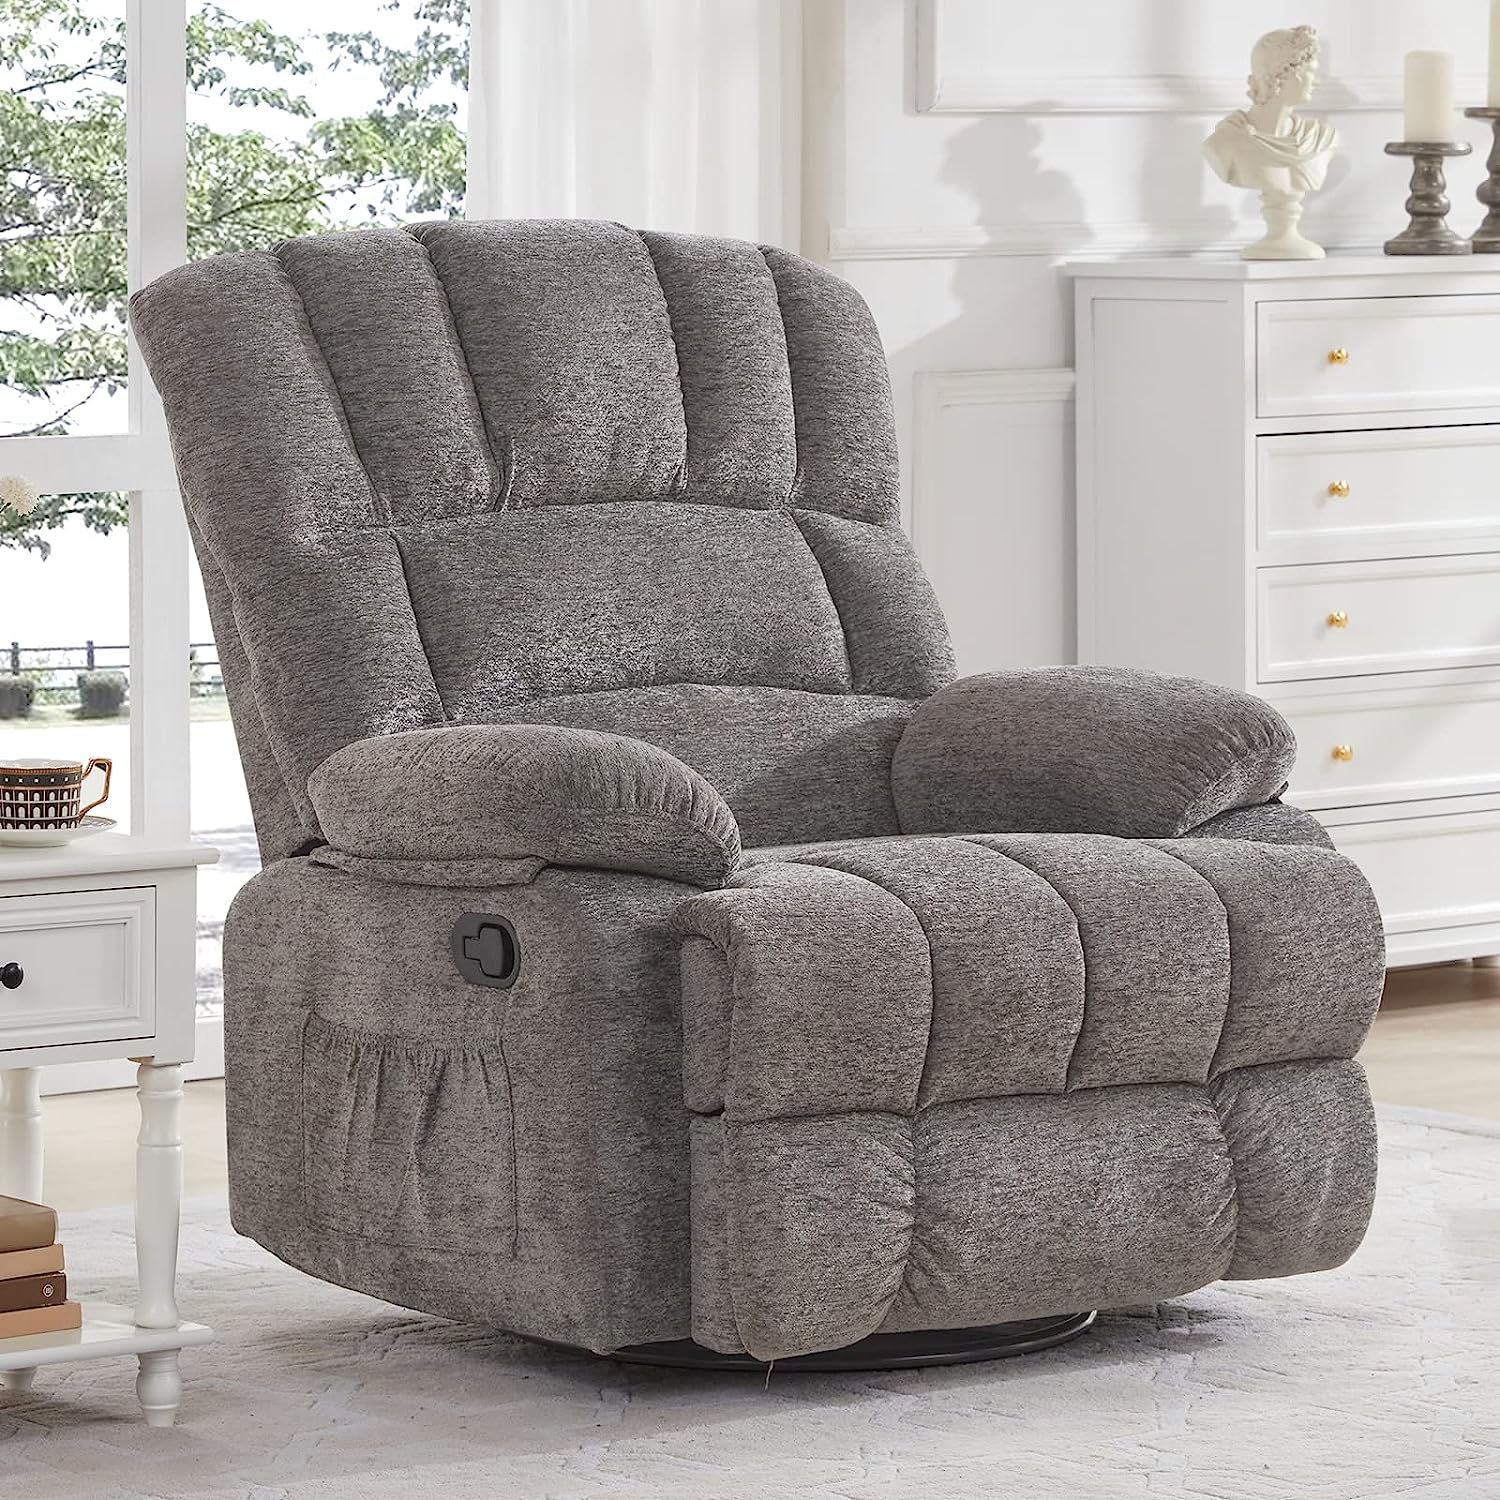 Dreamsir Oversized Rocker Recliner Chair for Adults, [...]